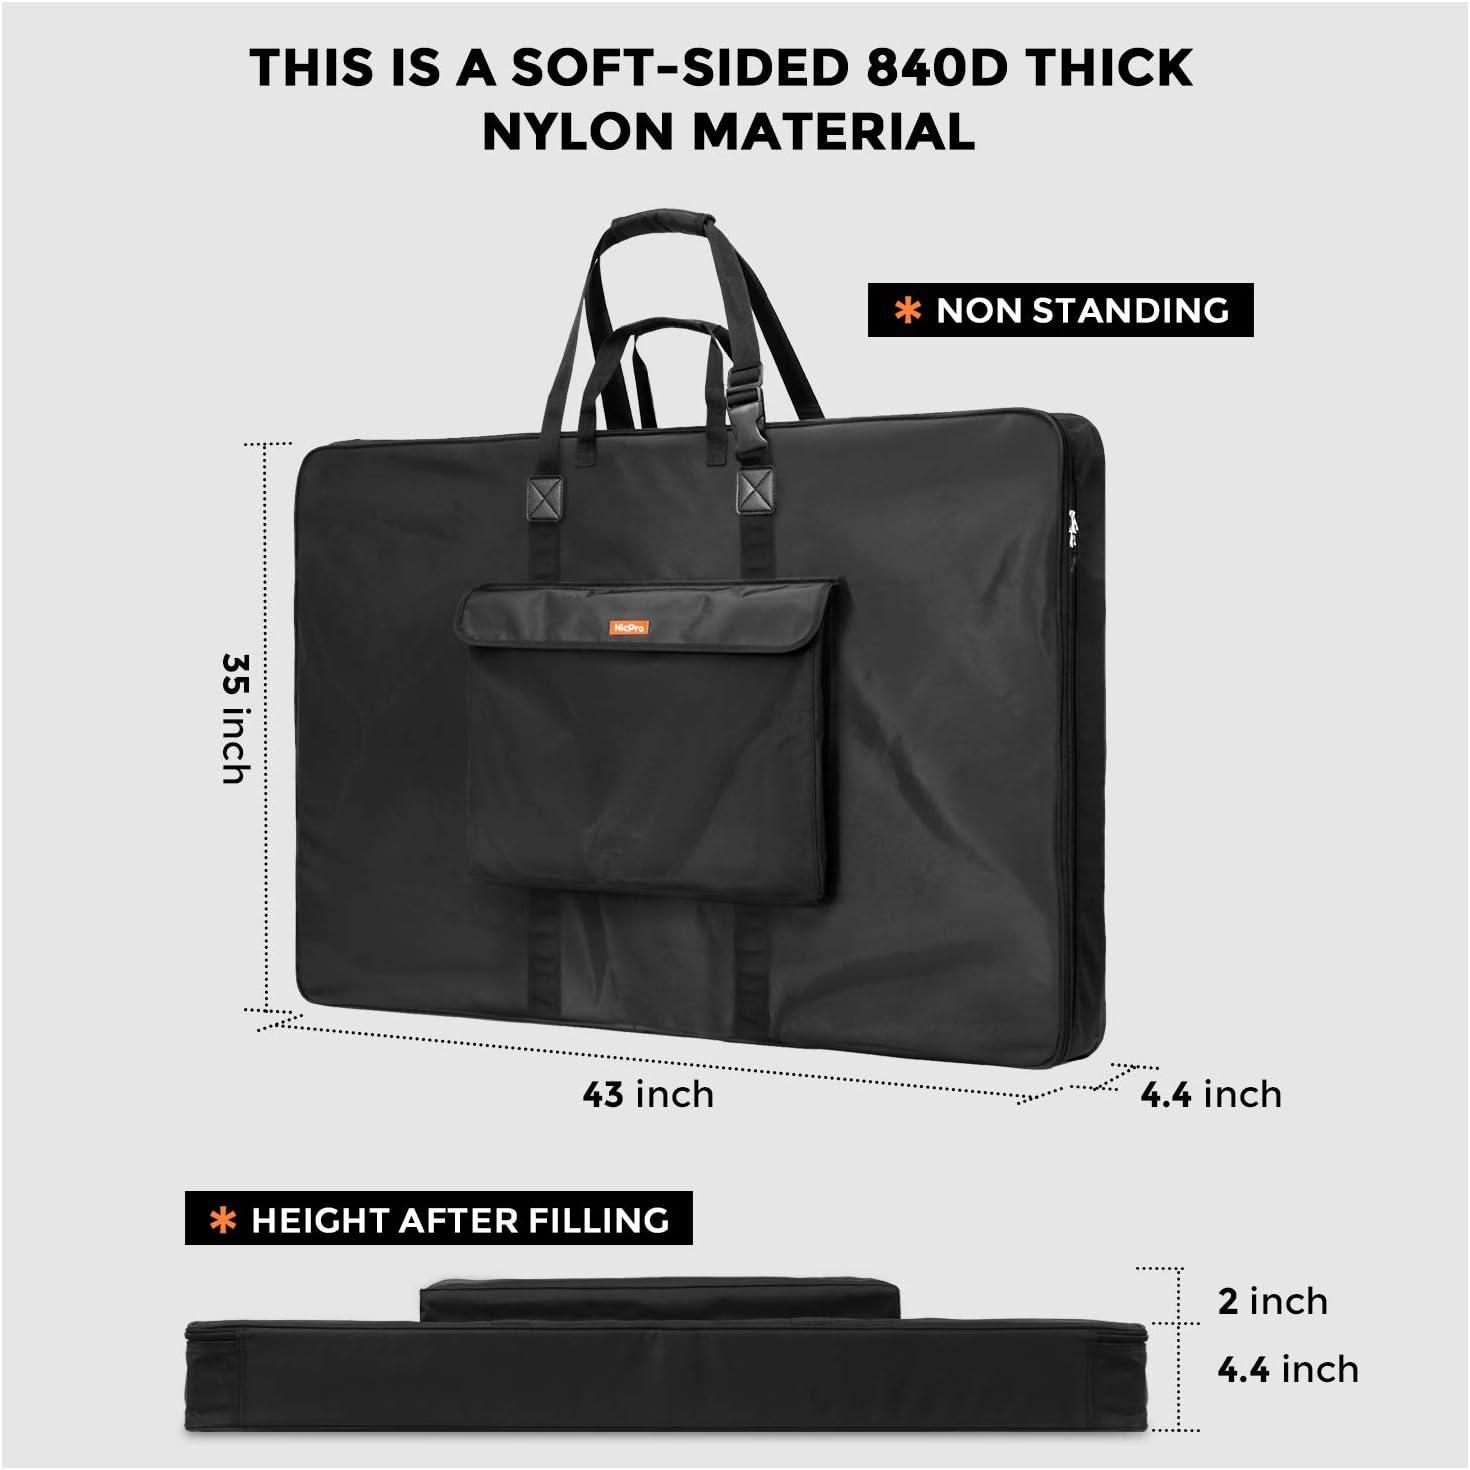 Nicpro Light Weight Art Portfolio Bag 24x36 Black Art Canvas Portfolio Case  with Detachable Shoulder Strap Leather Corners Carrying Storage Case for  Artwork Poster Sketching and Drawing 24 x 36 inches